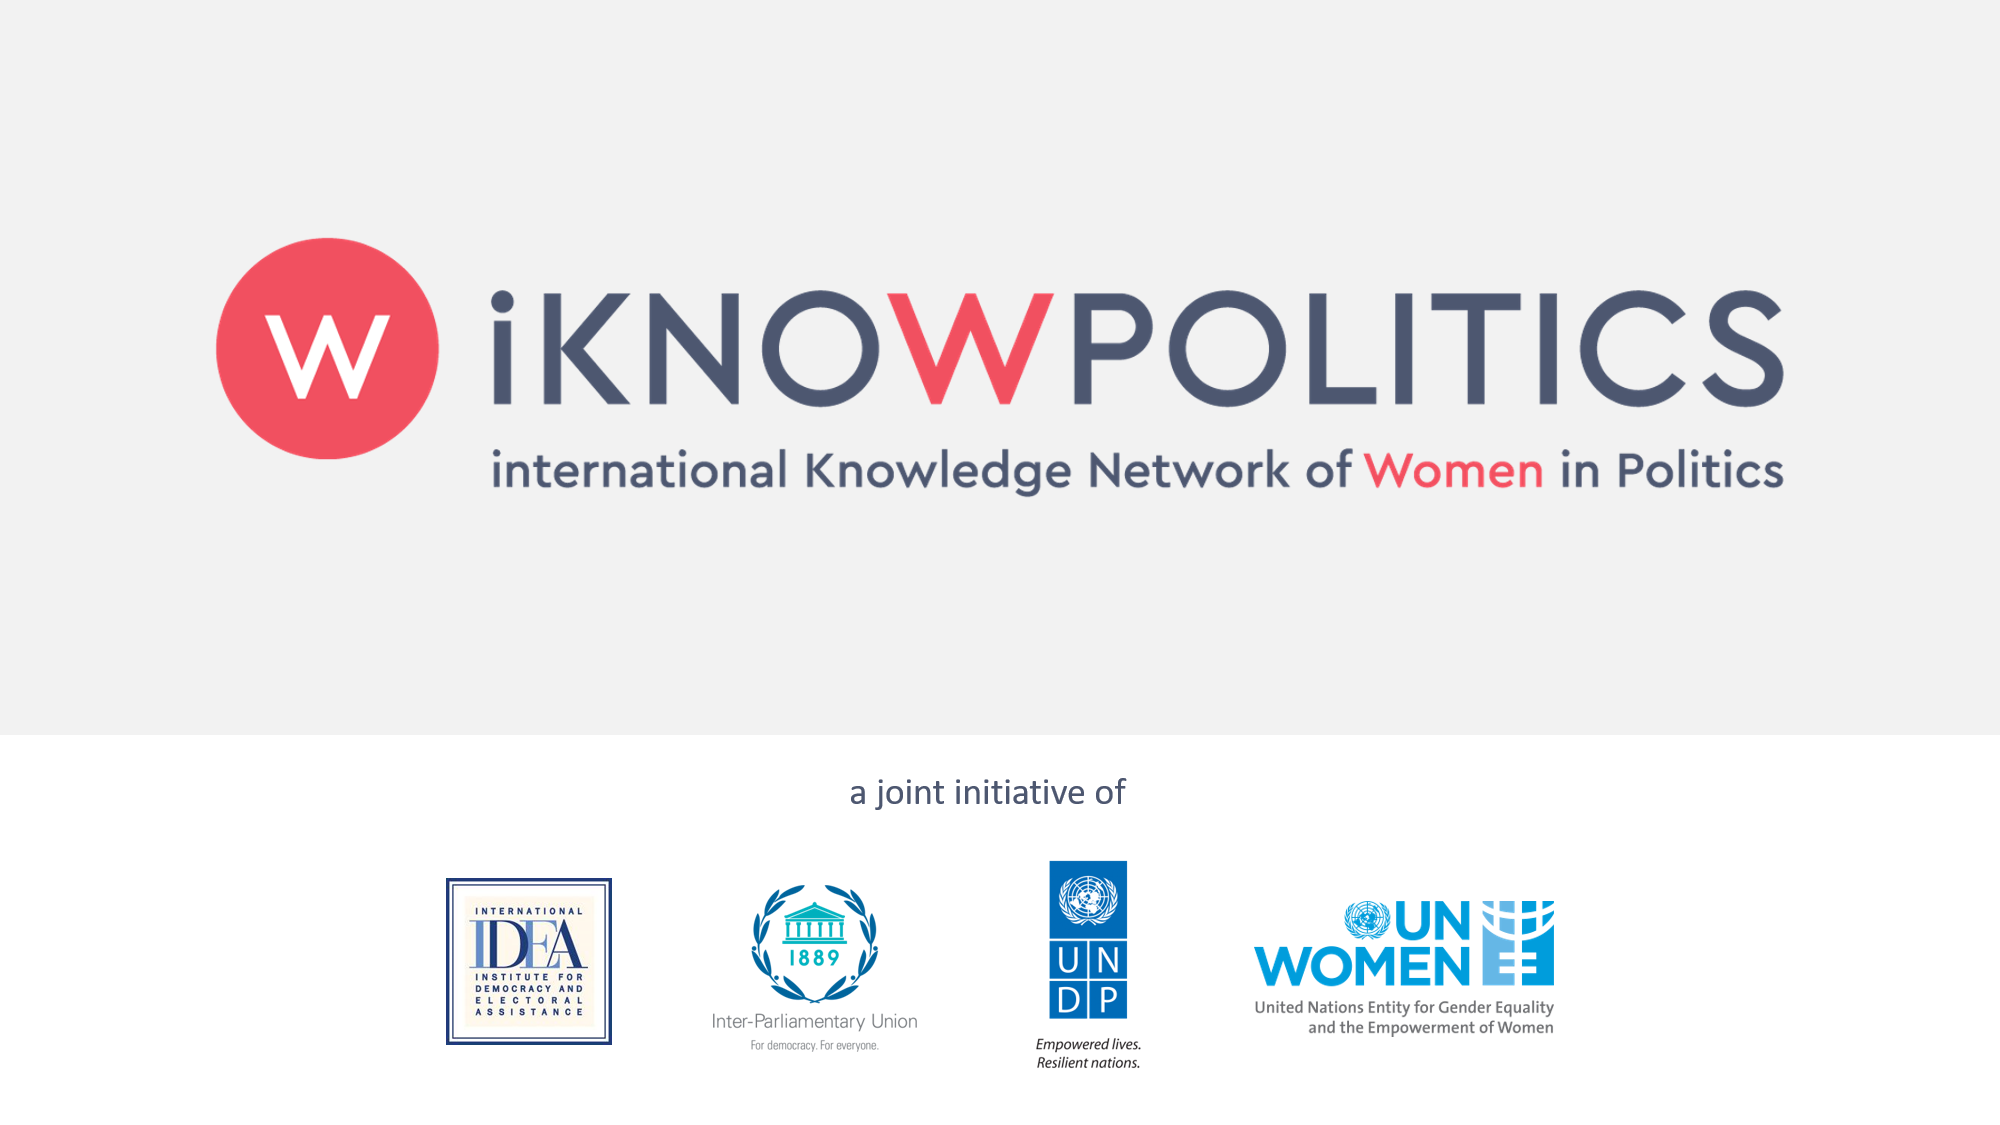 iKNOW Politics is a joint project of International IDEA, the Inter-Parliamentary Union (IPU), the United Nations Development Programme (UNDP), and the United Nations Entity for Gender Equality and the Empowerment of Women (UN Women).